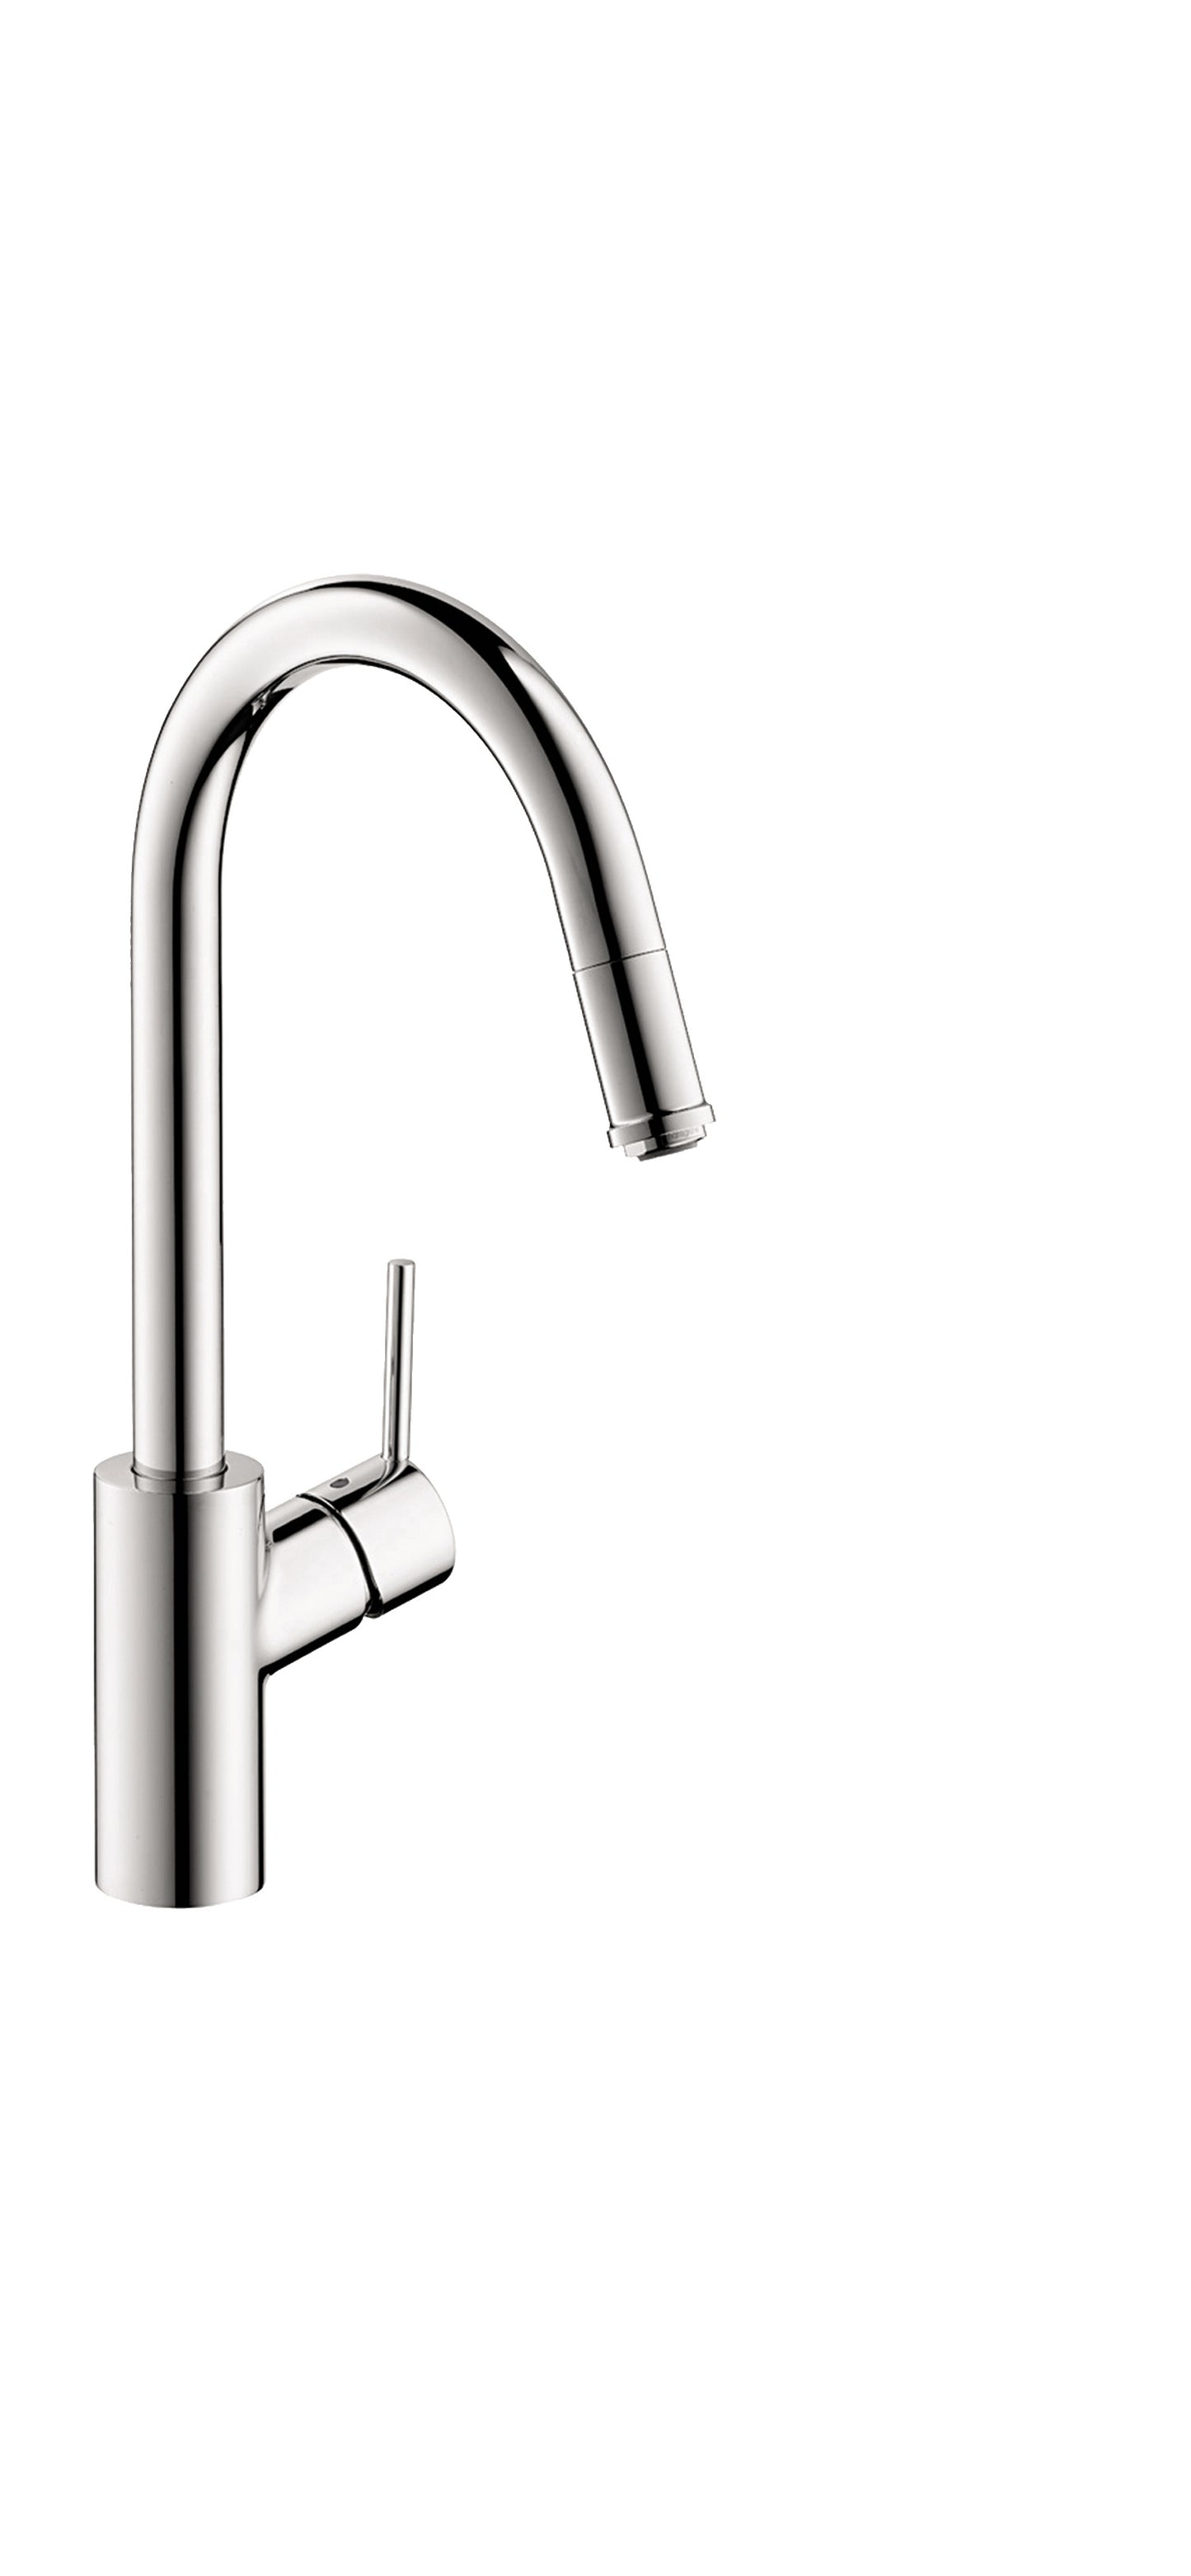 HANSGROHE 14872001 Chrome Talis S² Modern Kitchen Faucet 1.75 GPM